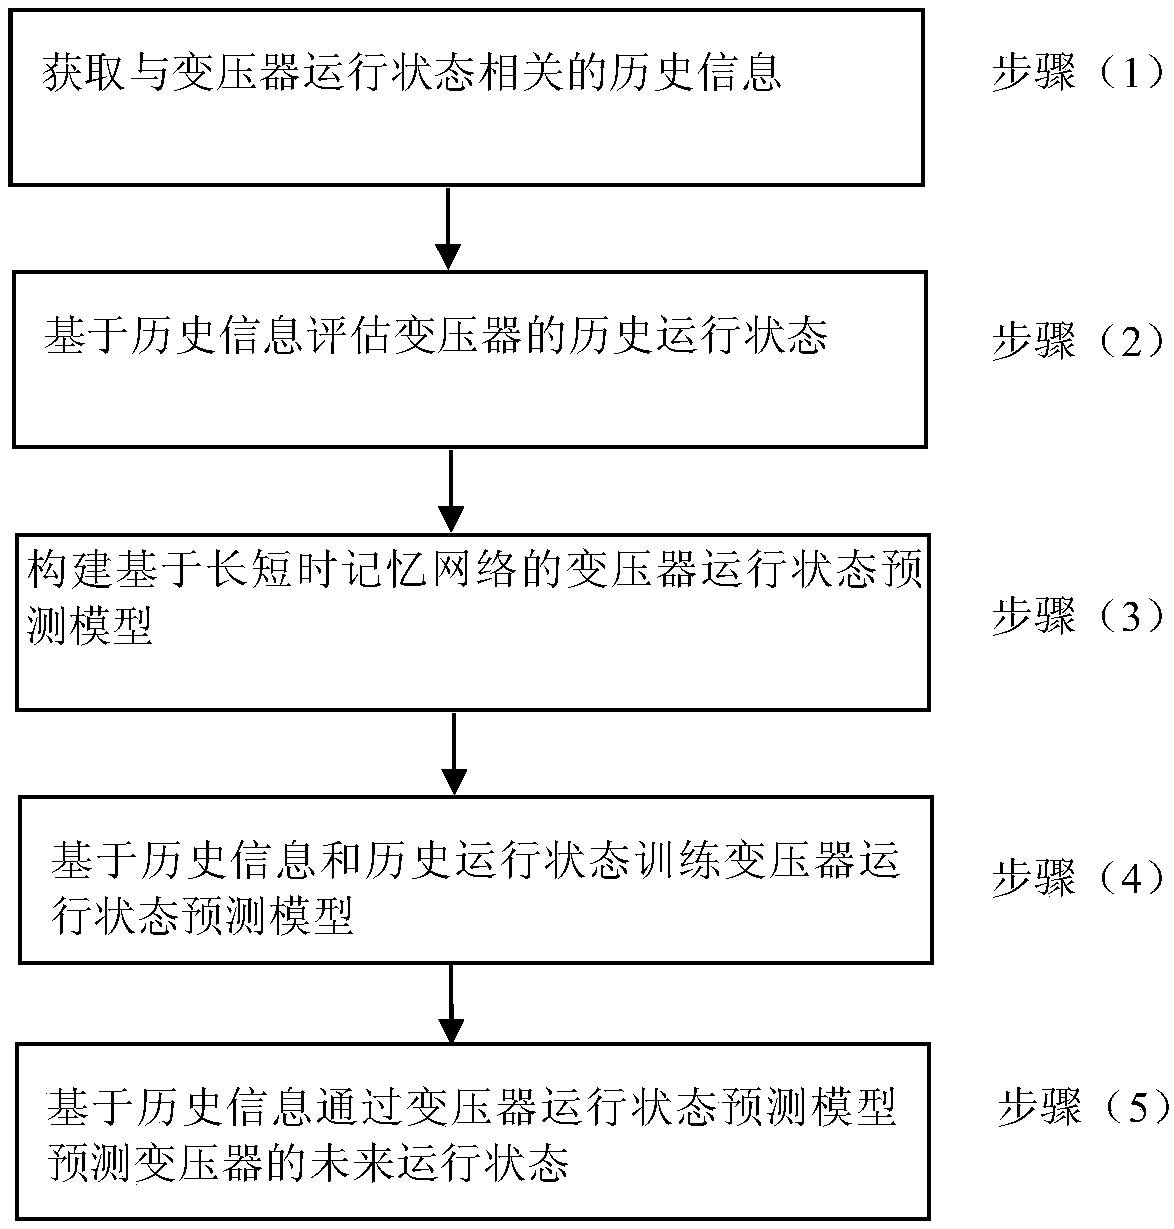 Transformer operation state prediction method based on long short term memory network and transformer operation state prediction system based on long short term memory network